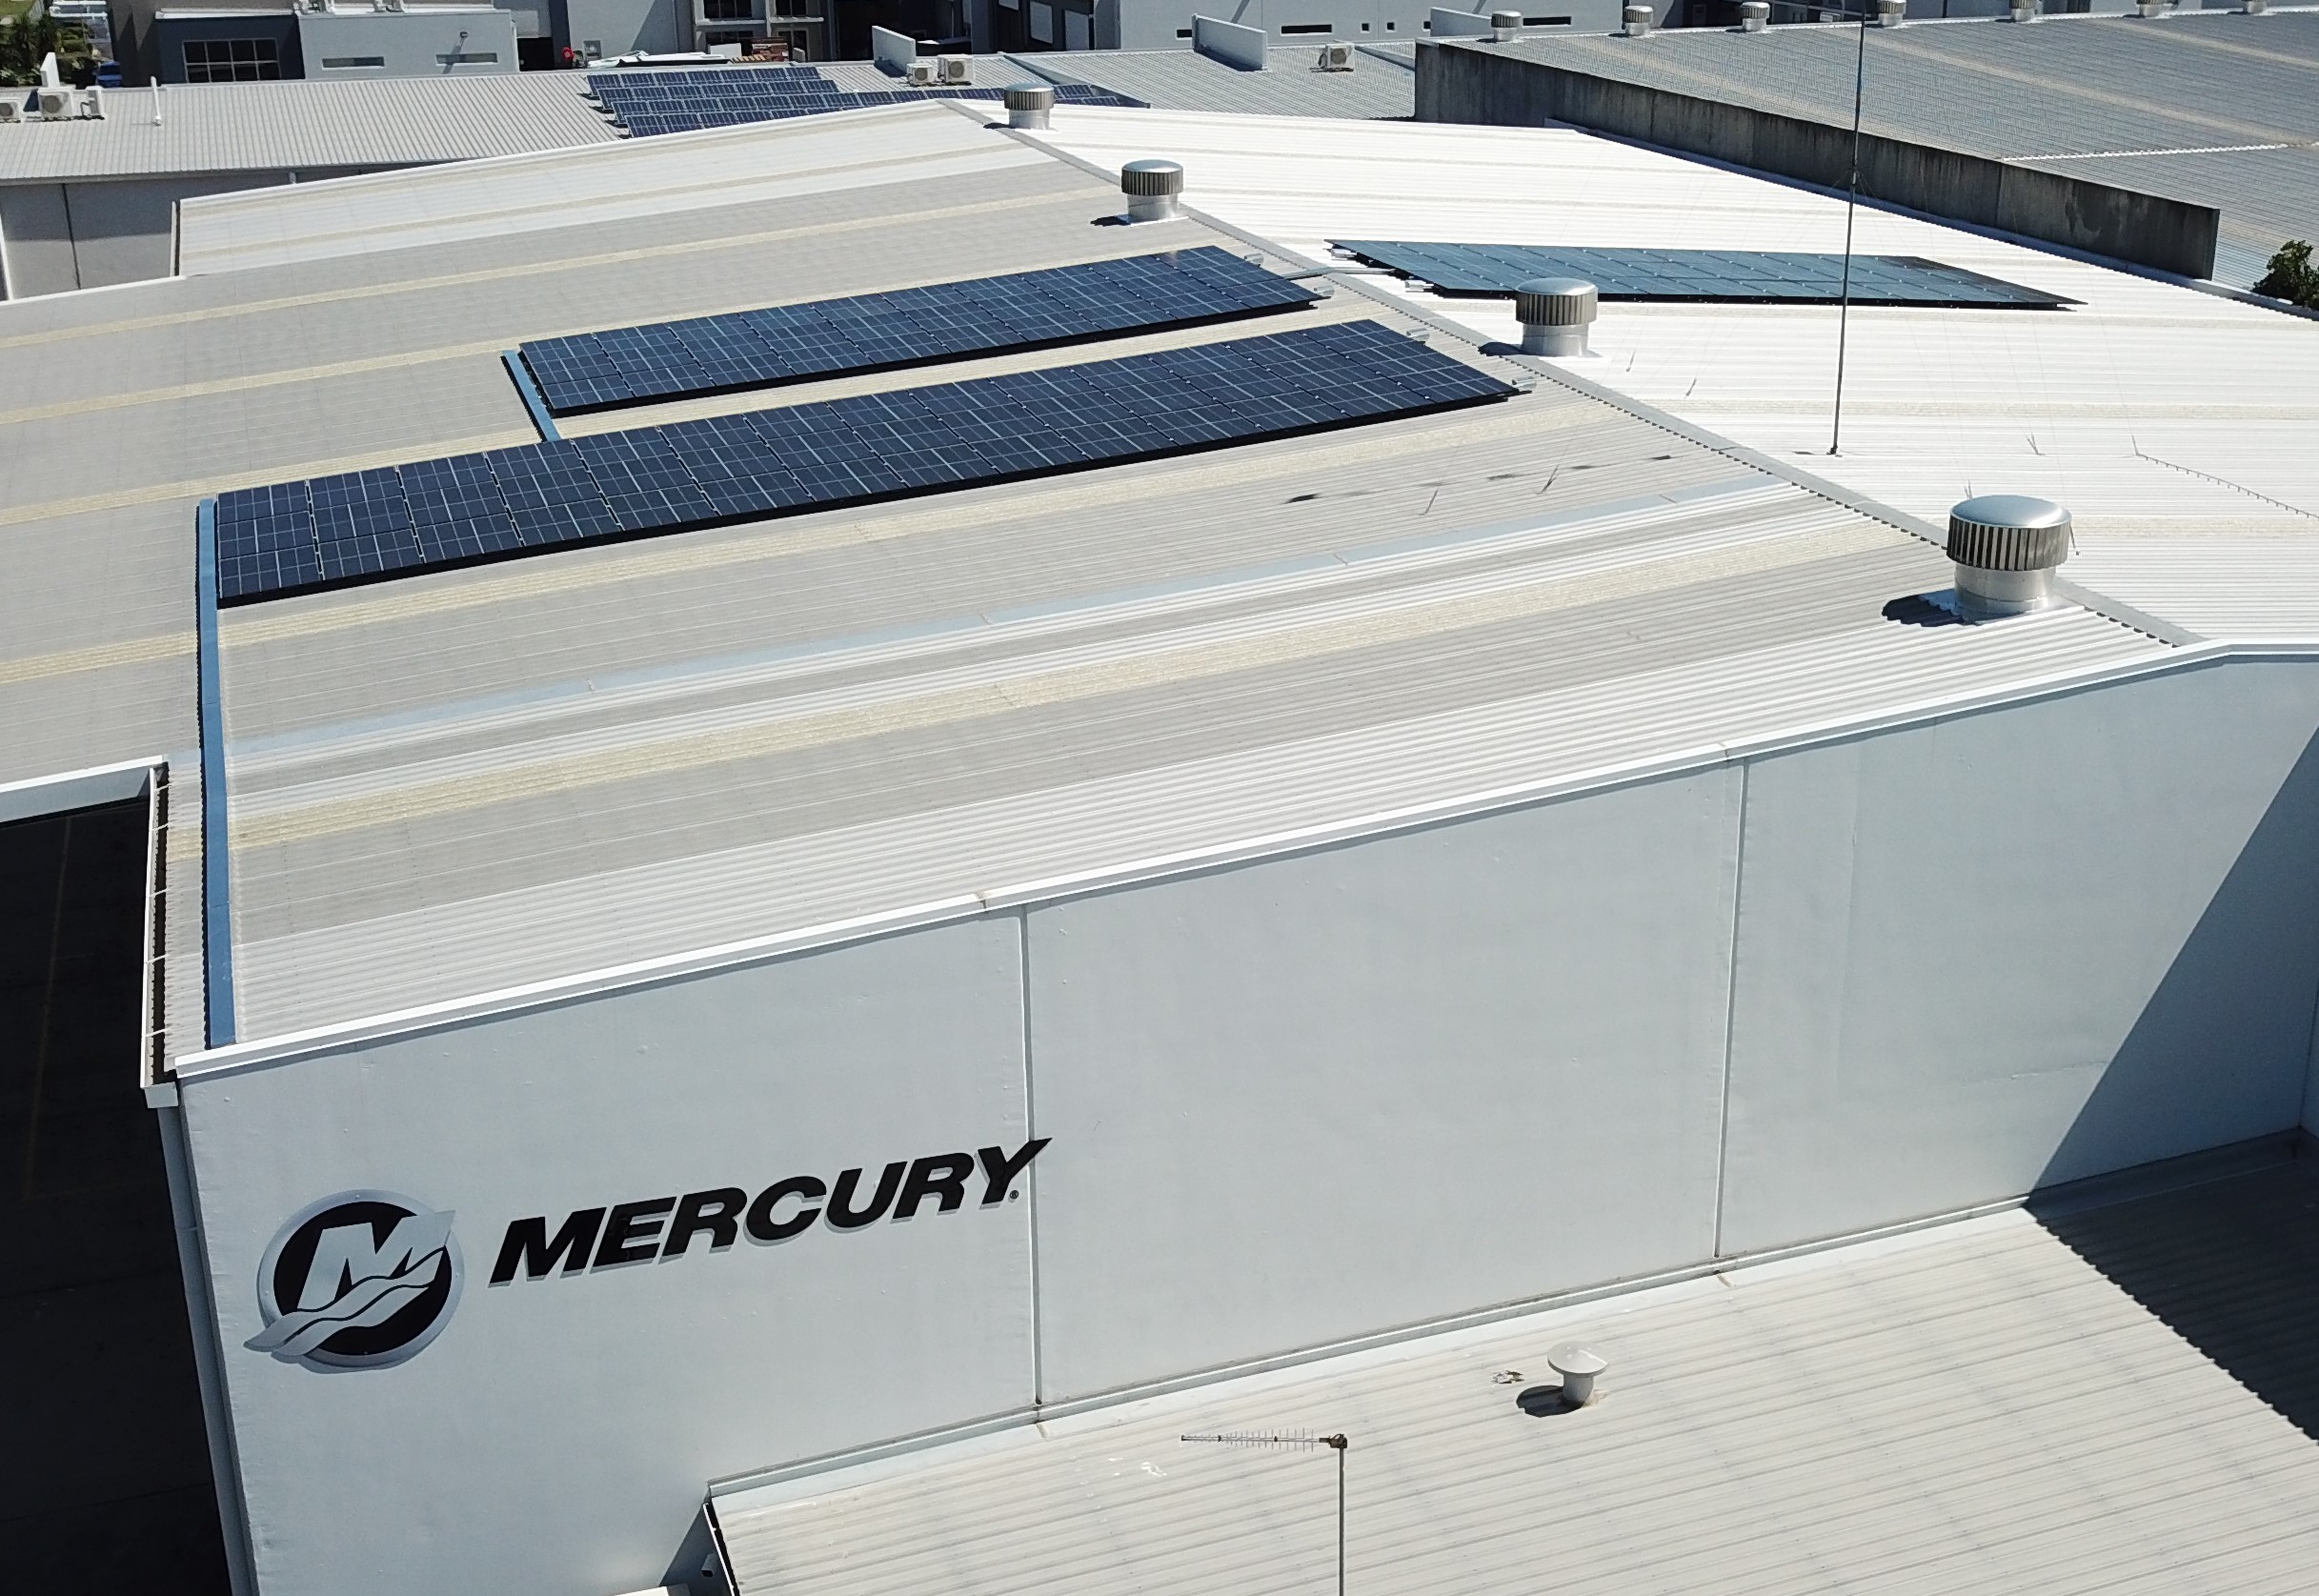 ONGOING INVESTMENT IN SUSTAINABILITY: MERCURY INVESTS HEAVILY TO EXPAND RENEWABLE ENERGY